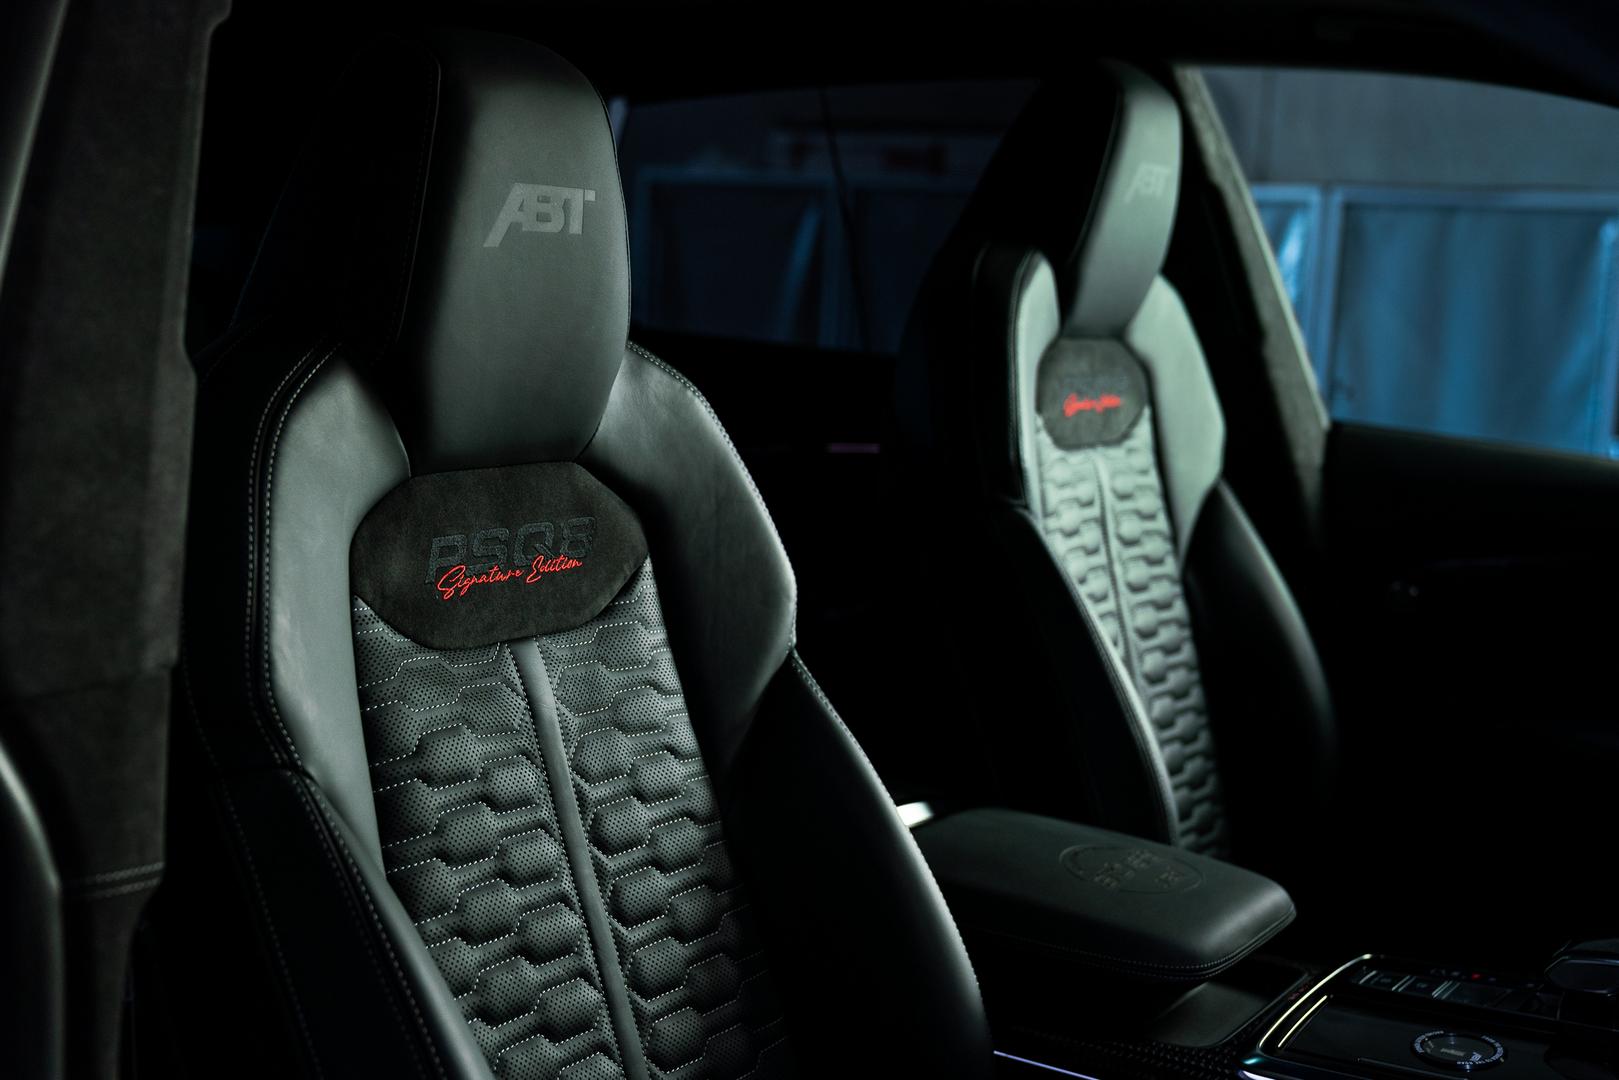 ABT RSQ8 seats